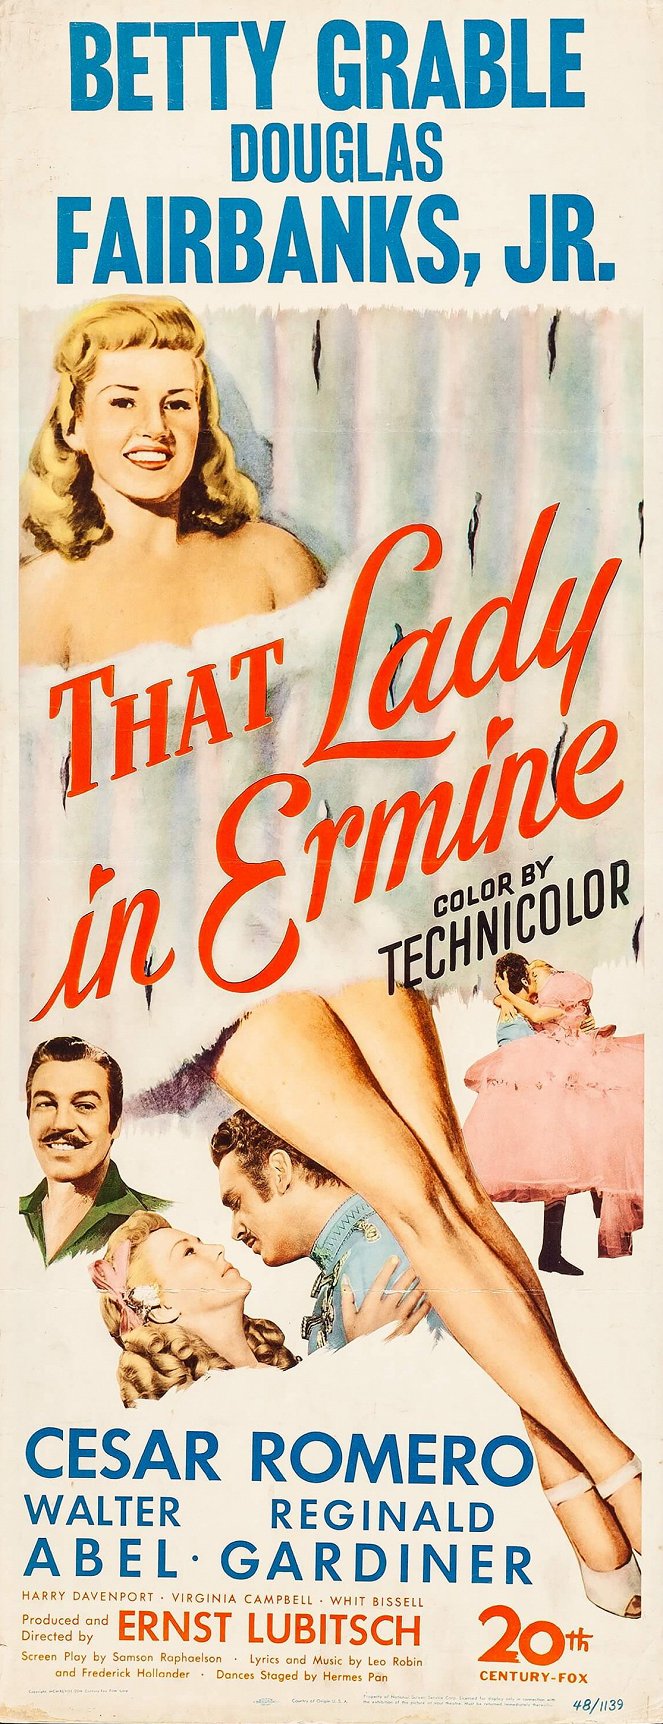 That Lady in Ermine - Posters